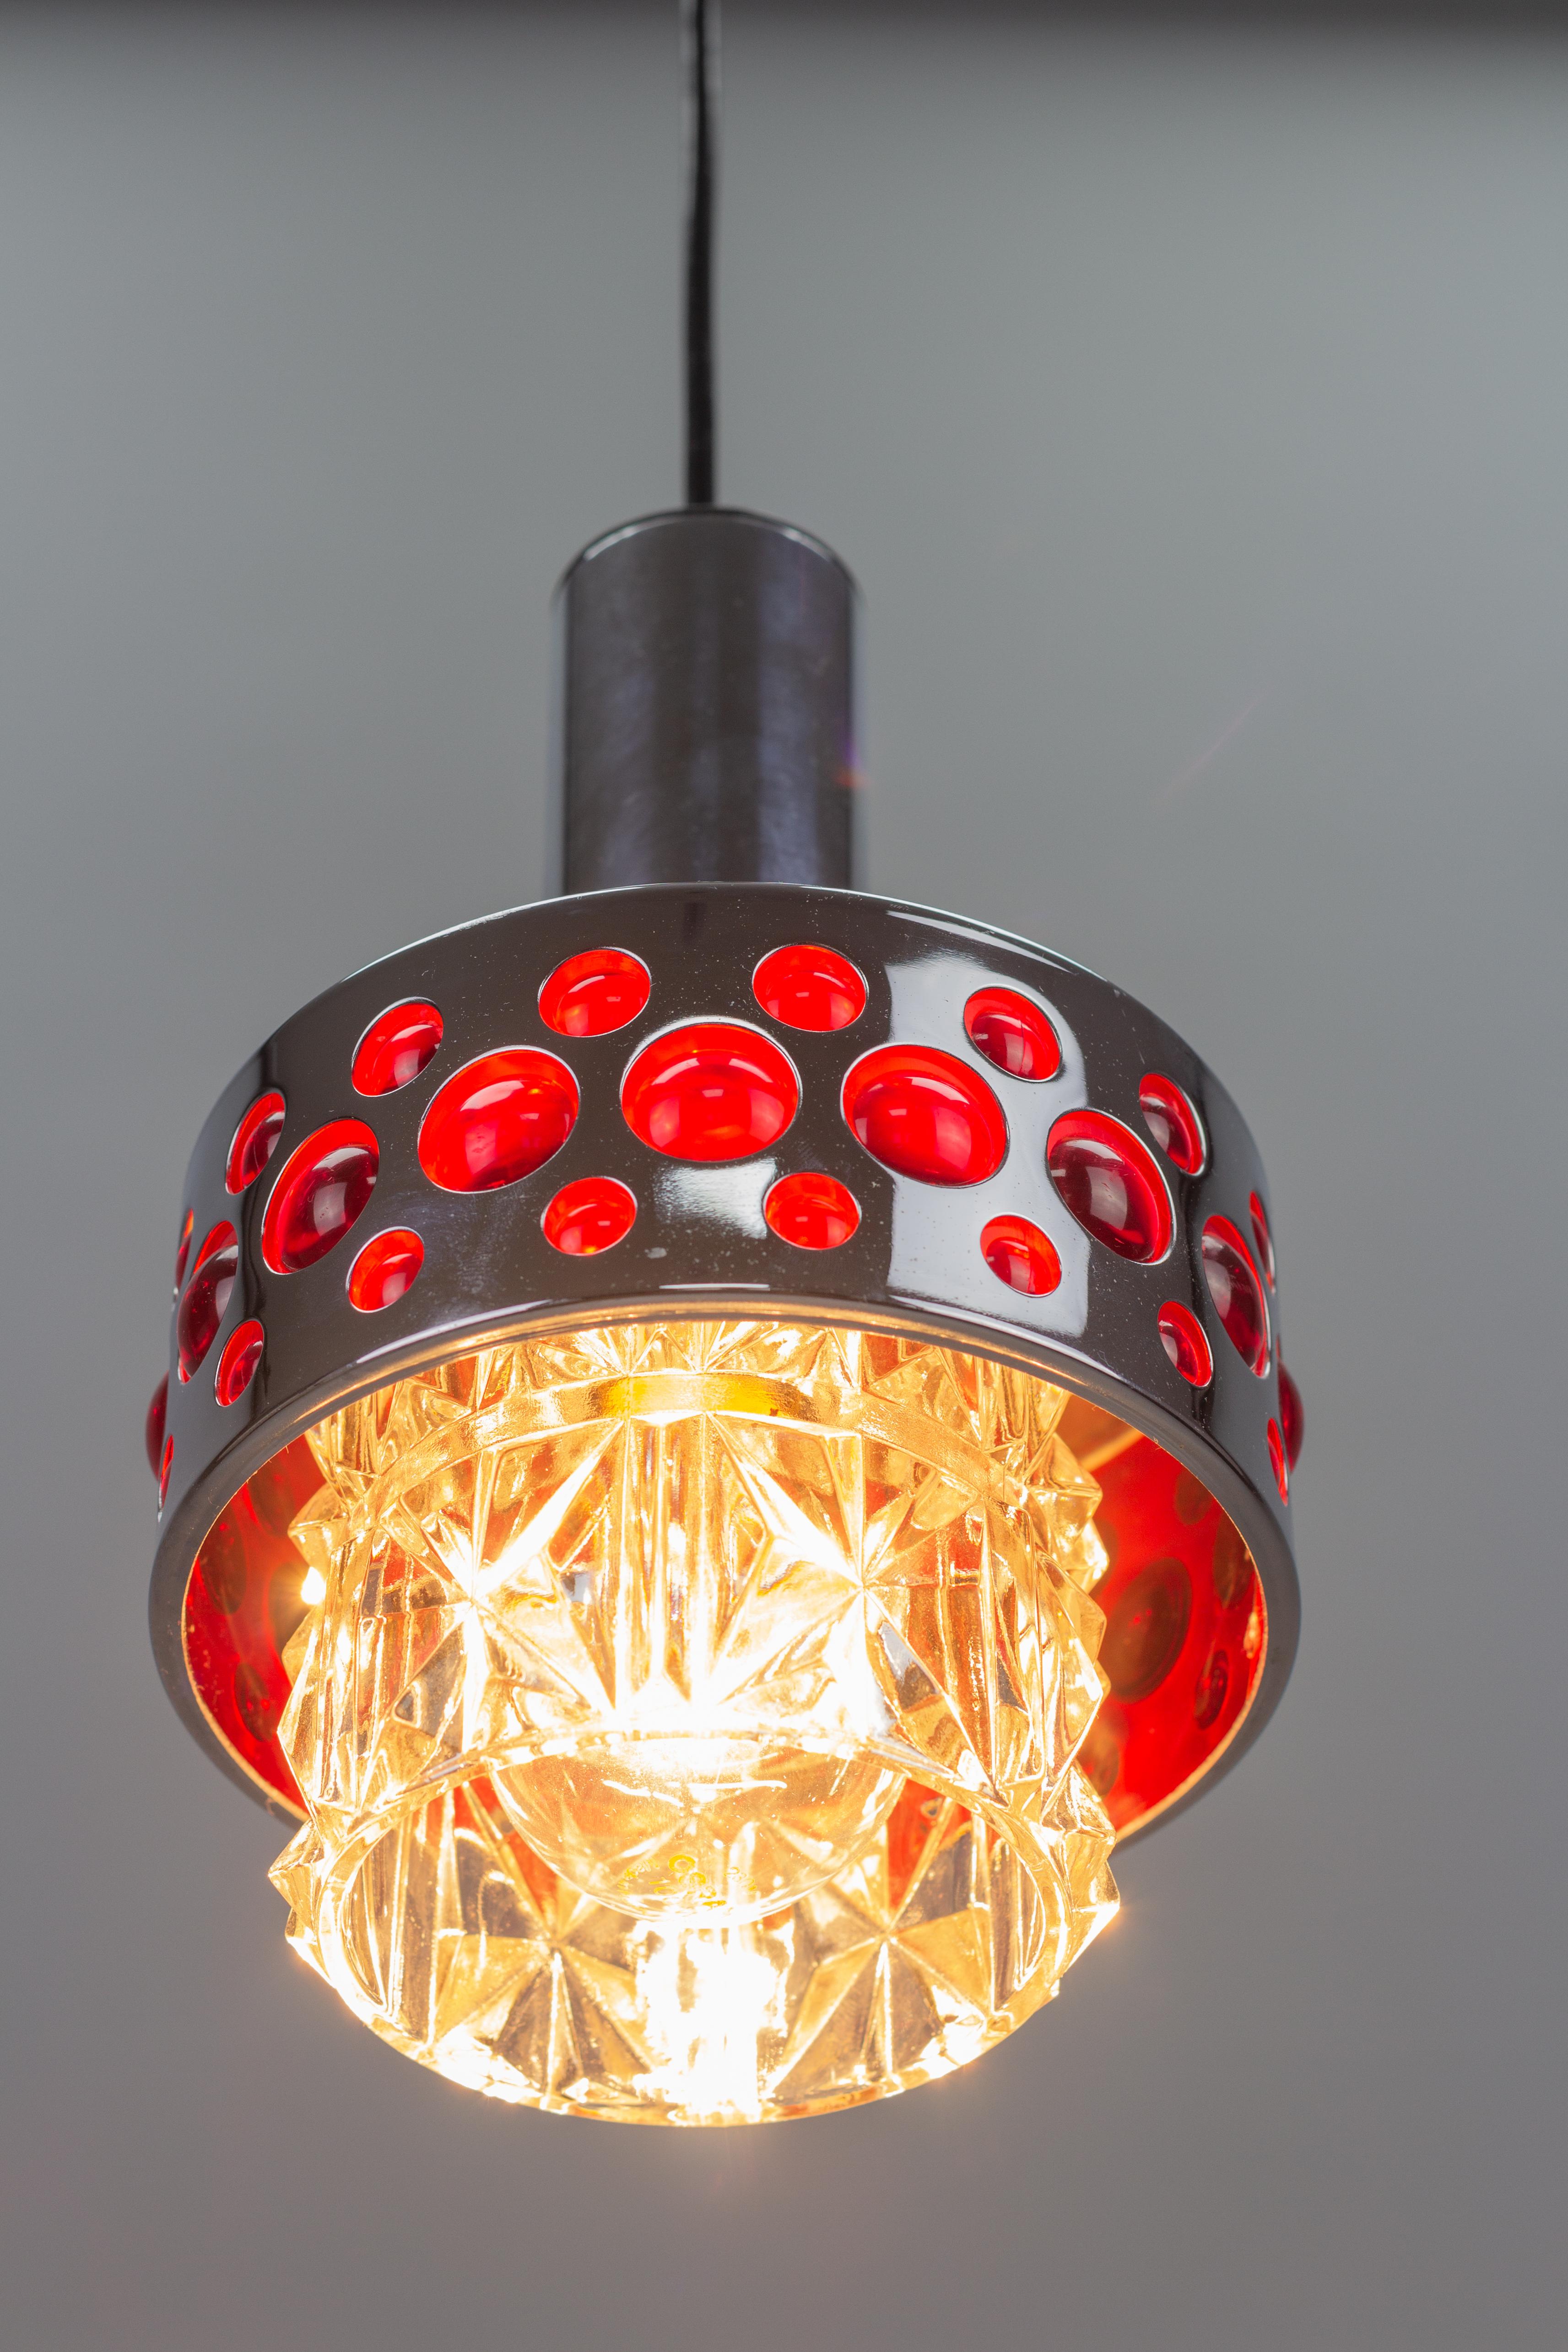 German Mid-Century Modern Chrome and Red Pendant Light by Richard Essig, 1970s For Sale 3